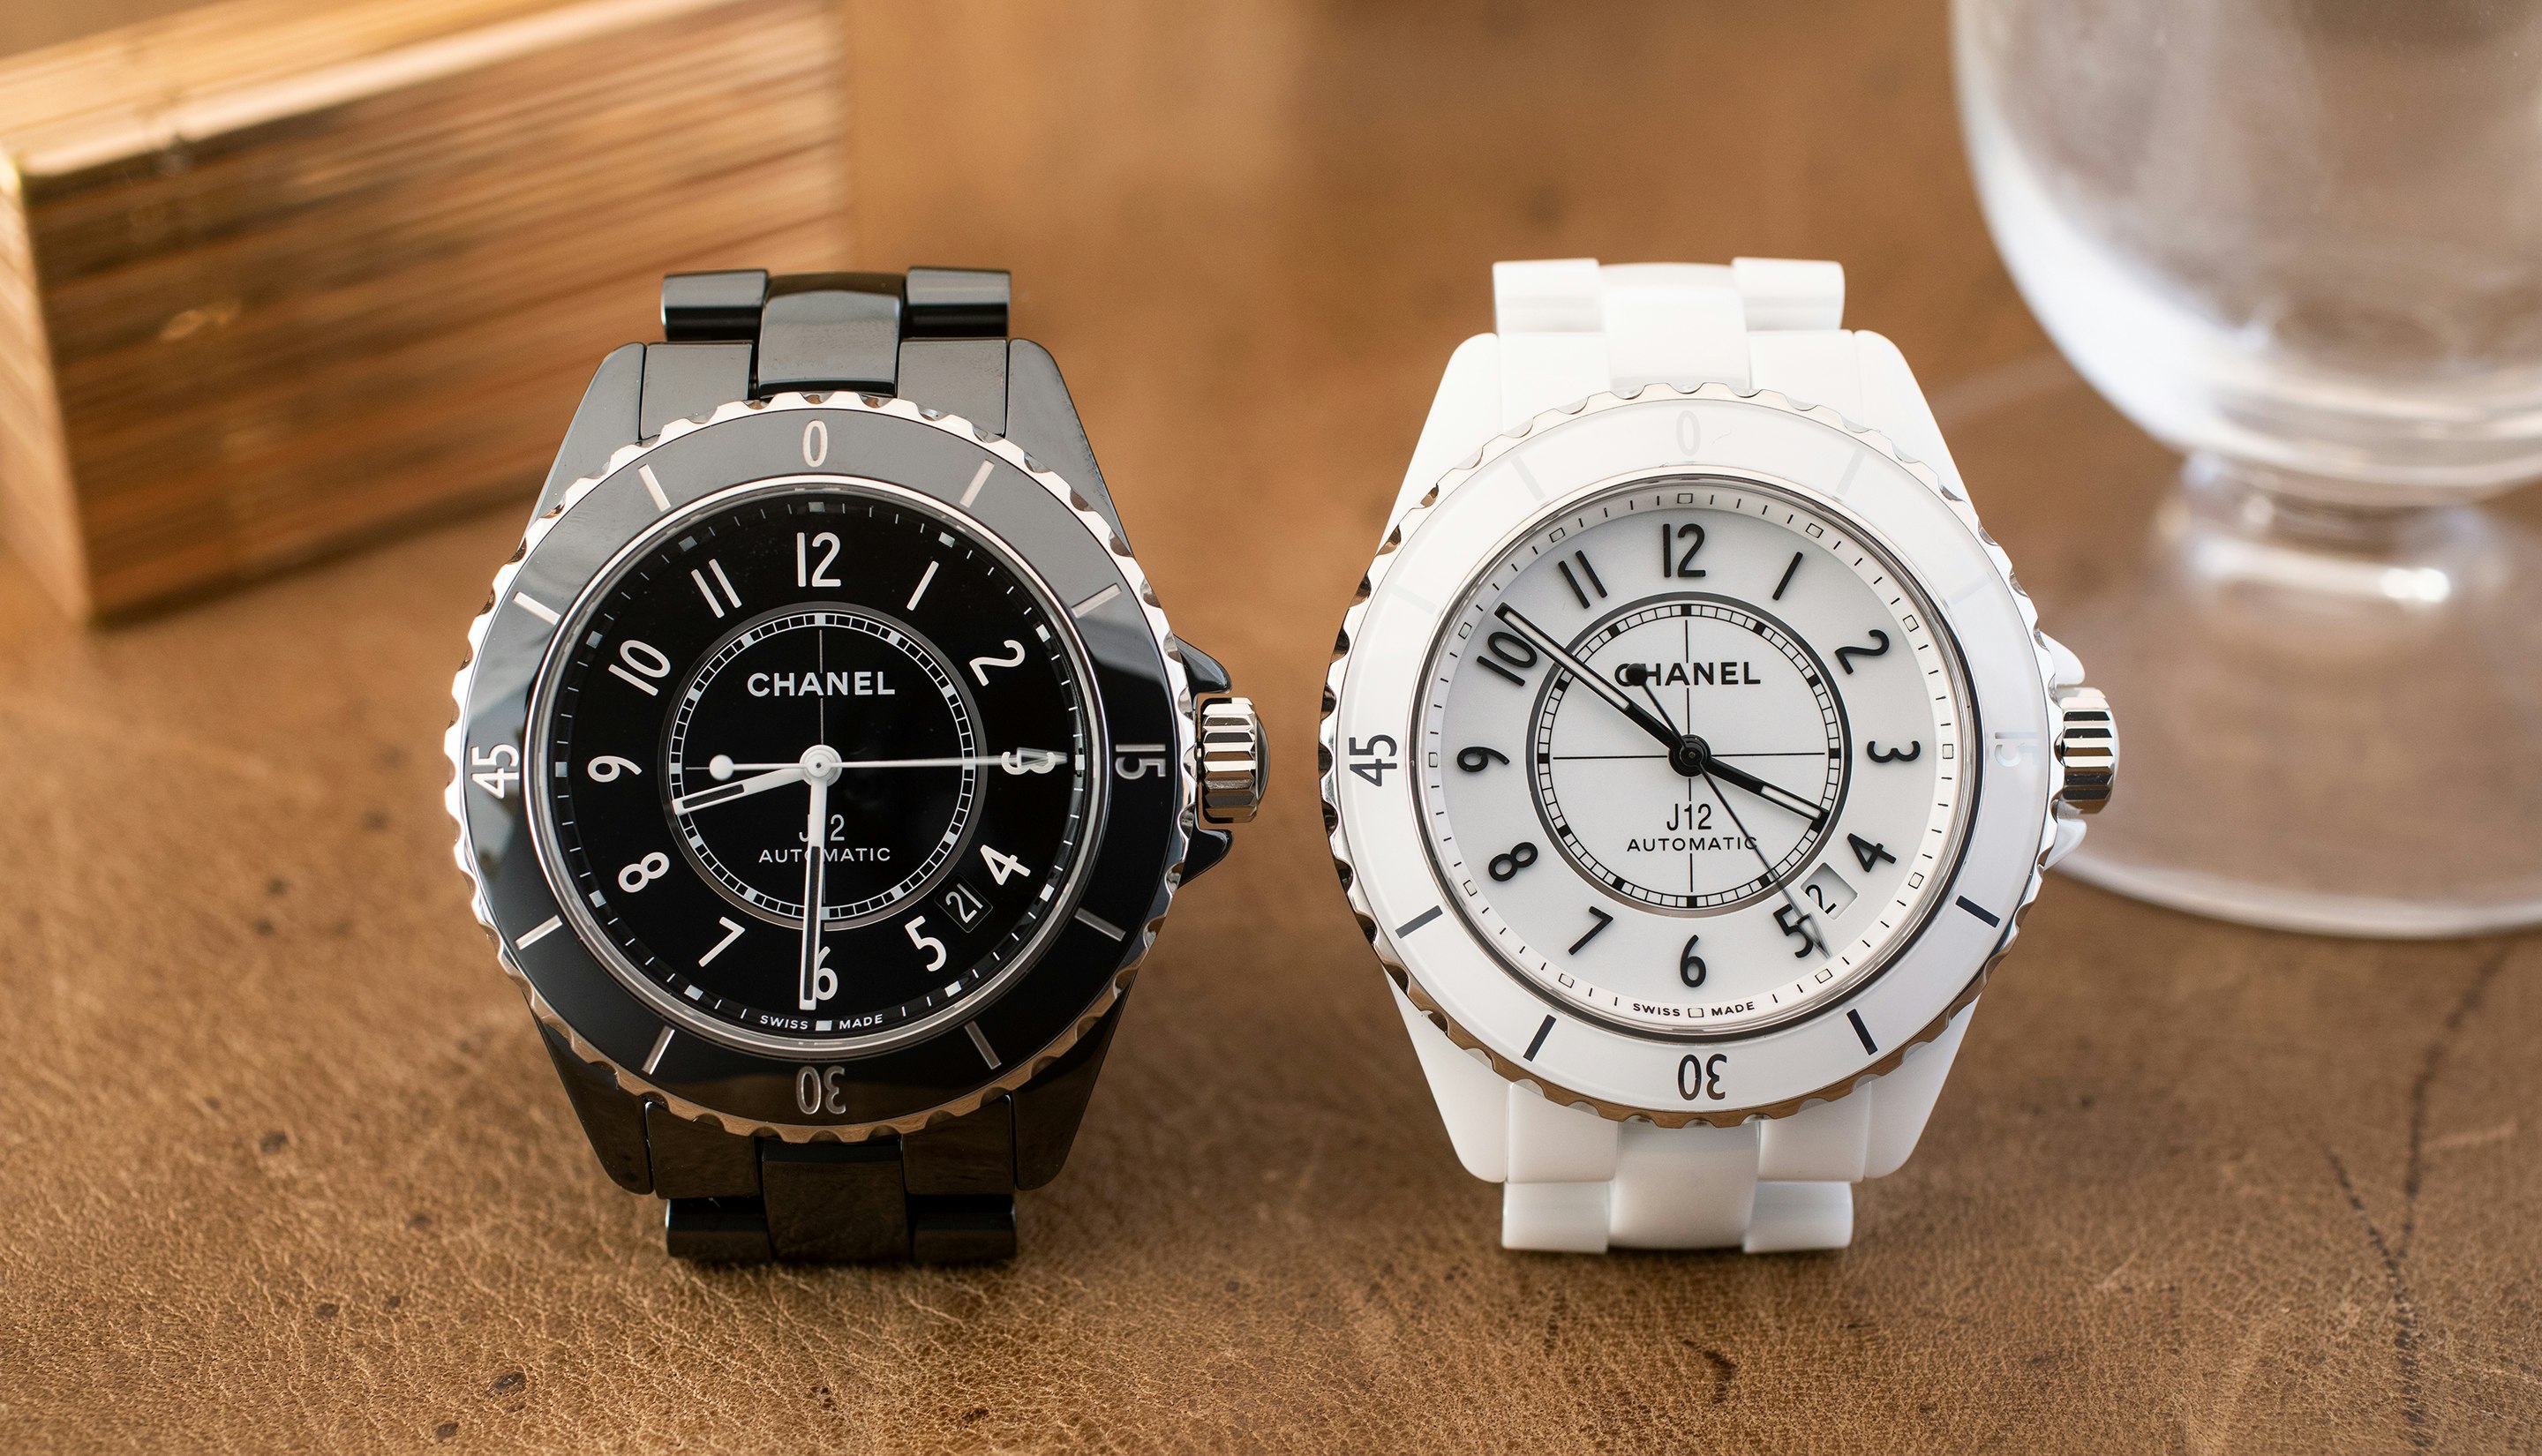 Chanel watches make worlds 1st online debut in Korea  KED Global